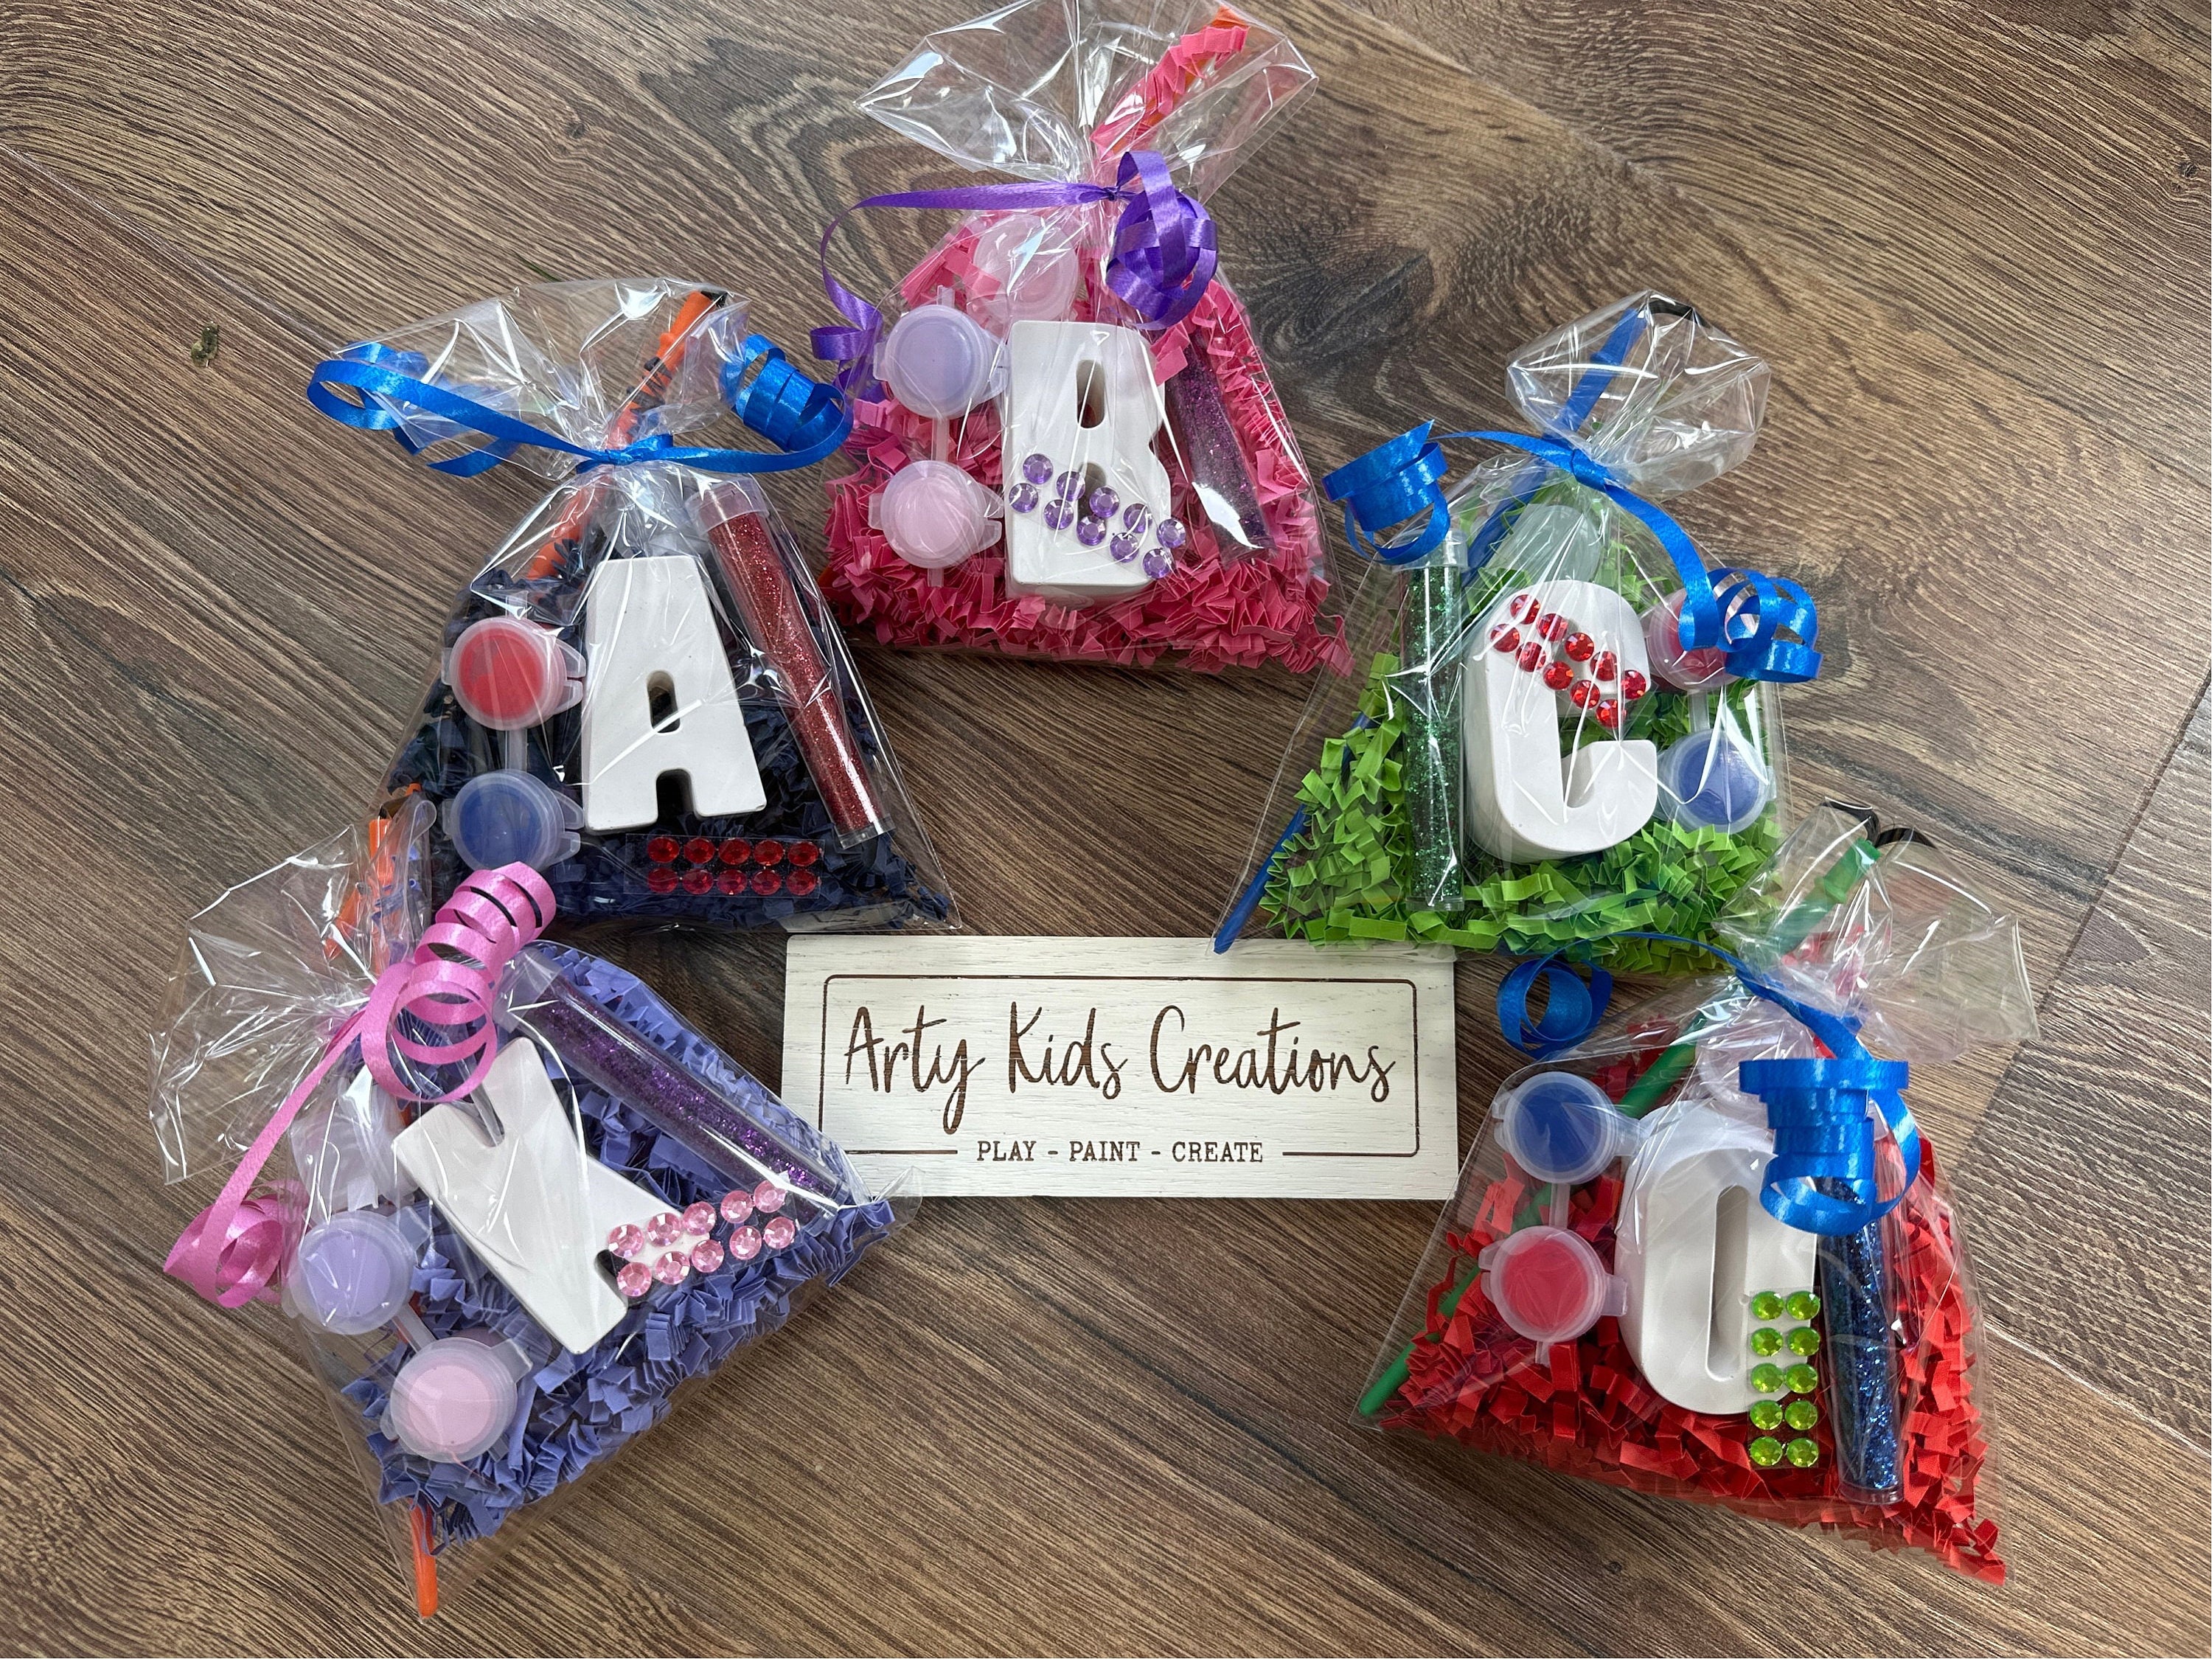 12 Princes party favors.Creative.To paint Girls party favors.PRICE PER 12  BAGS.